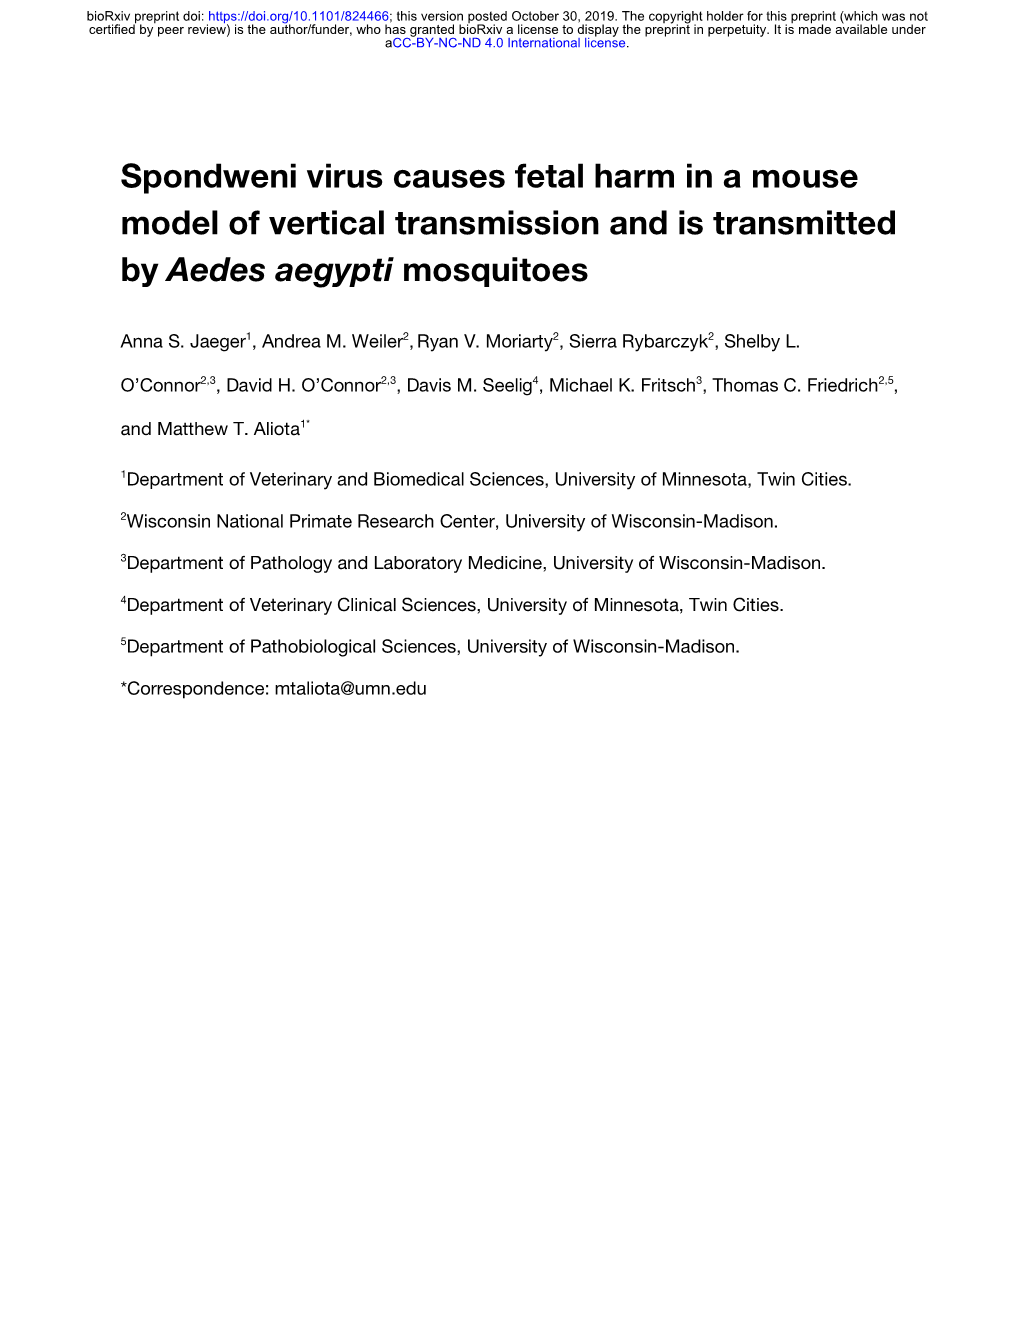 Spondweni Virus Causes Fetal Harm in a Mouse Model of Vertical Transmission and Is Transmitted by Aedes Aegypti Mosquitoes